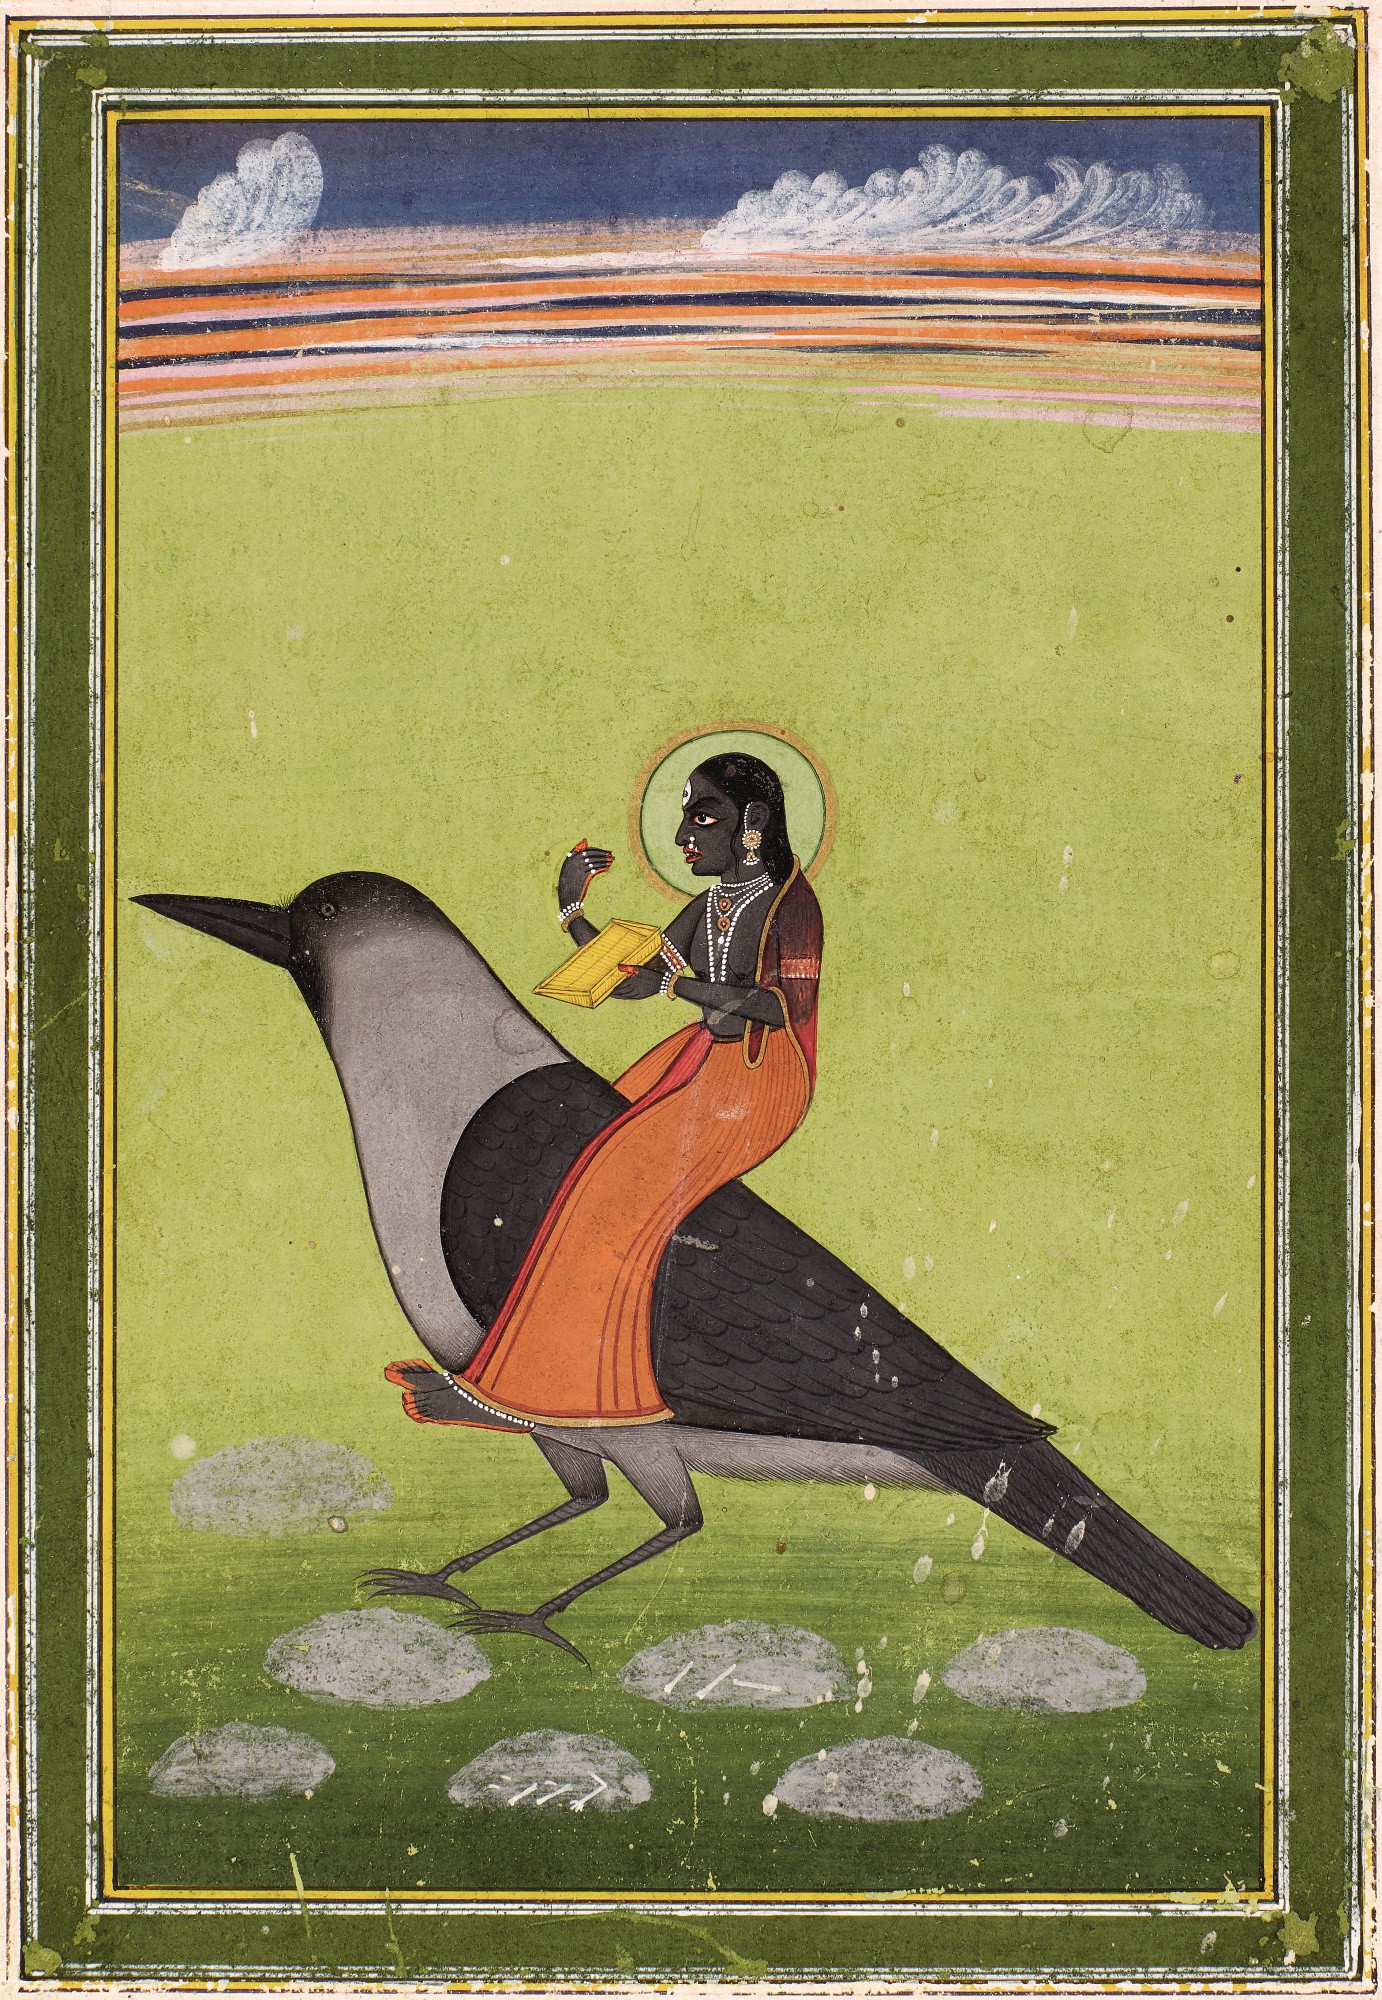 Dhumavati on a Crow by Unknown Artist - c. 1830 - 22.2 x 13.3 cm private collection